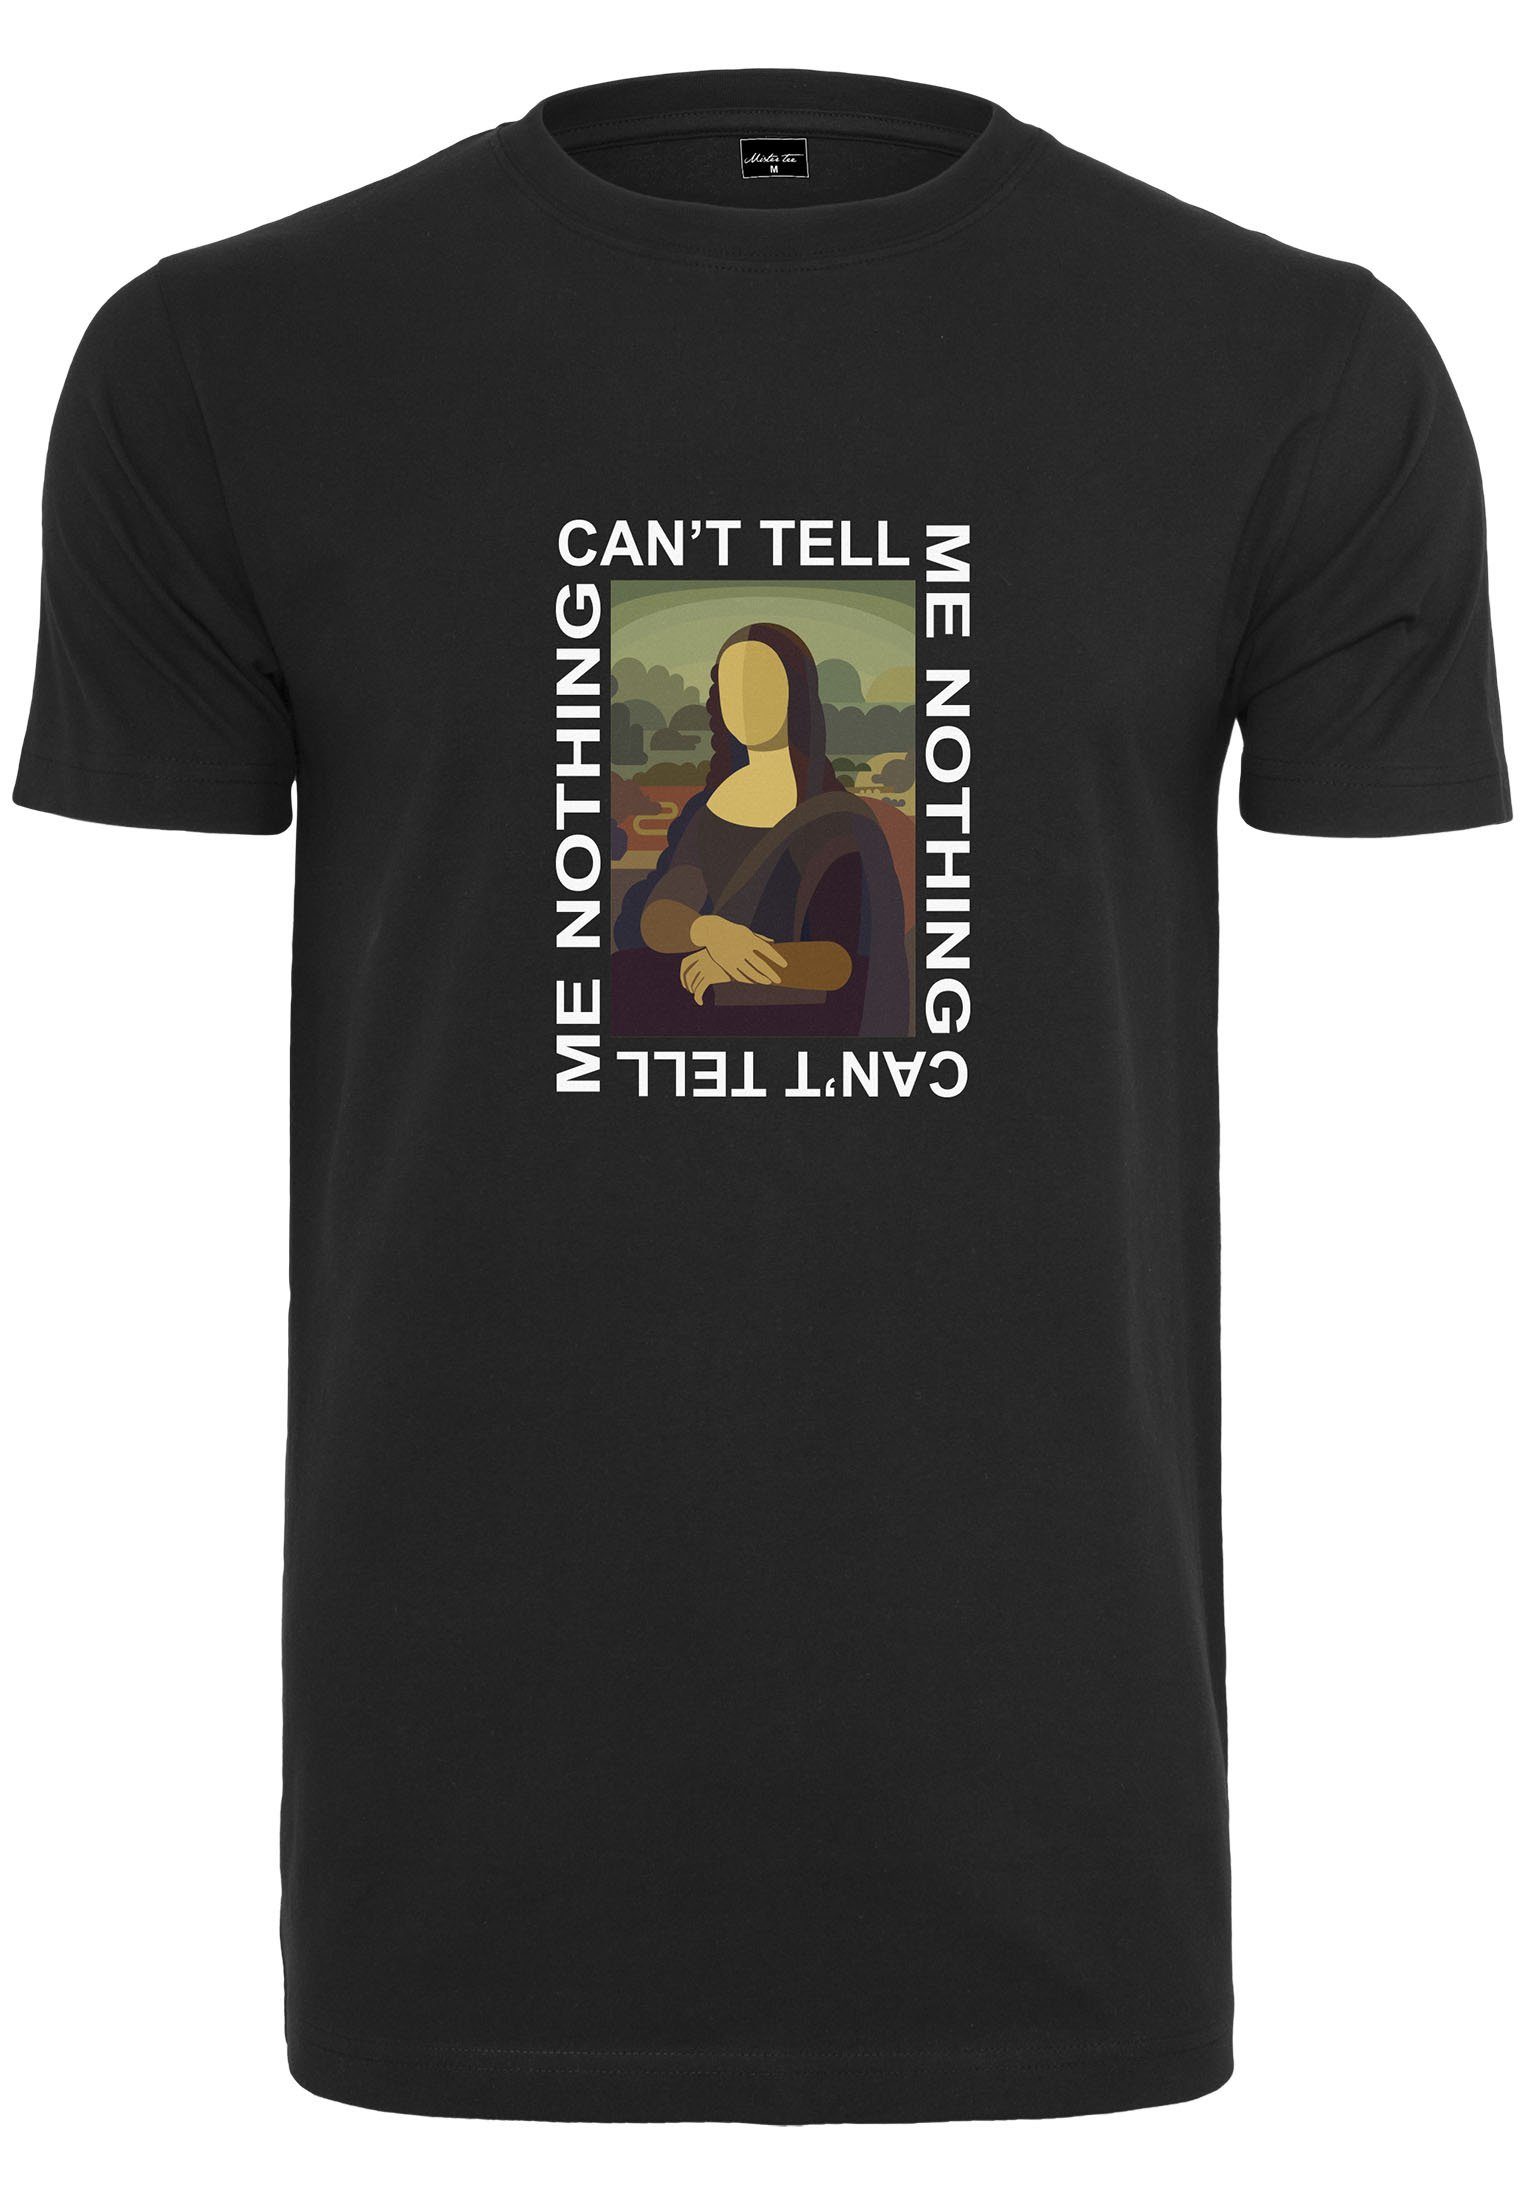 Me black MisterTee (1-tlg) Tee Nothing T-Shirt Nothing MT1060 Tell Tell Herren Cant Me Can´t